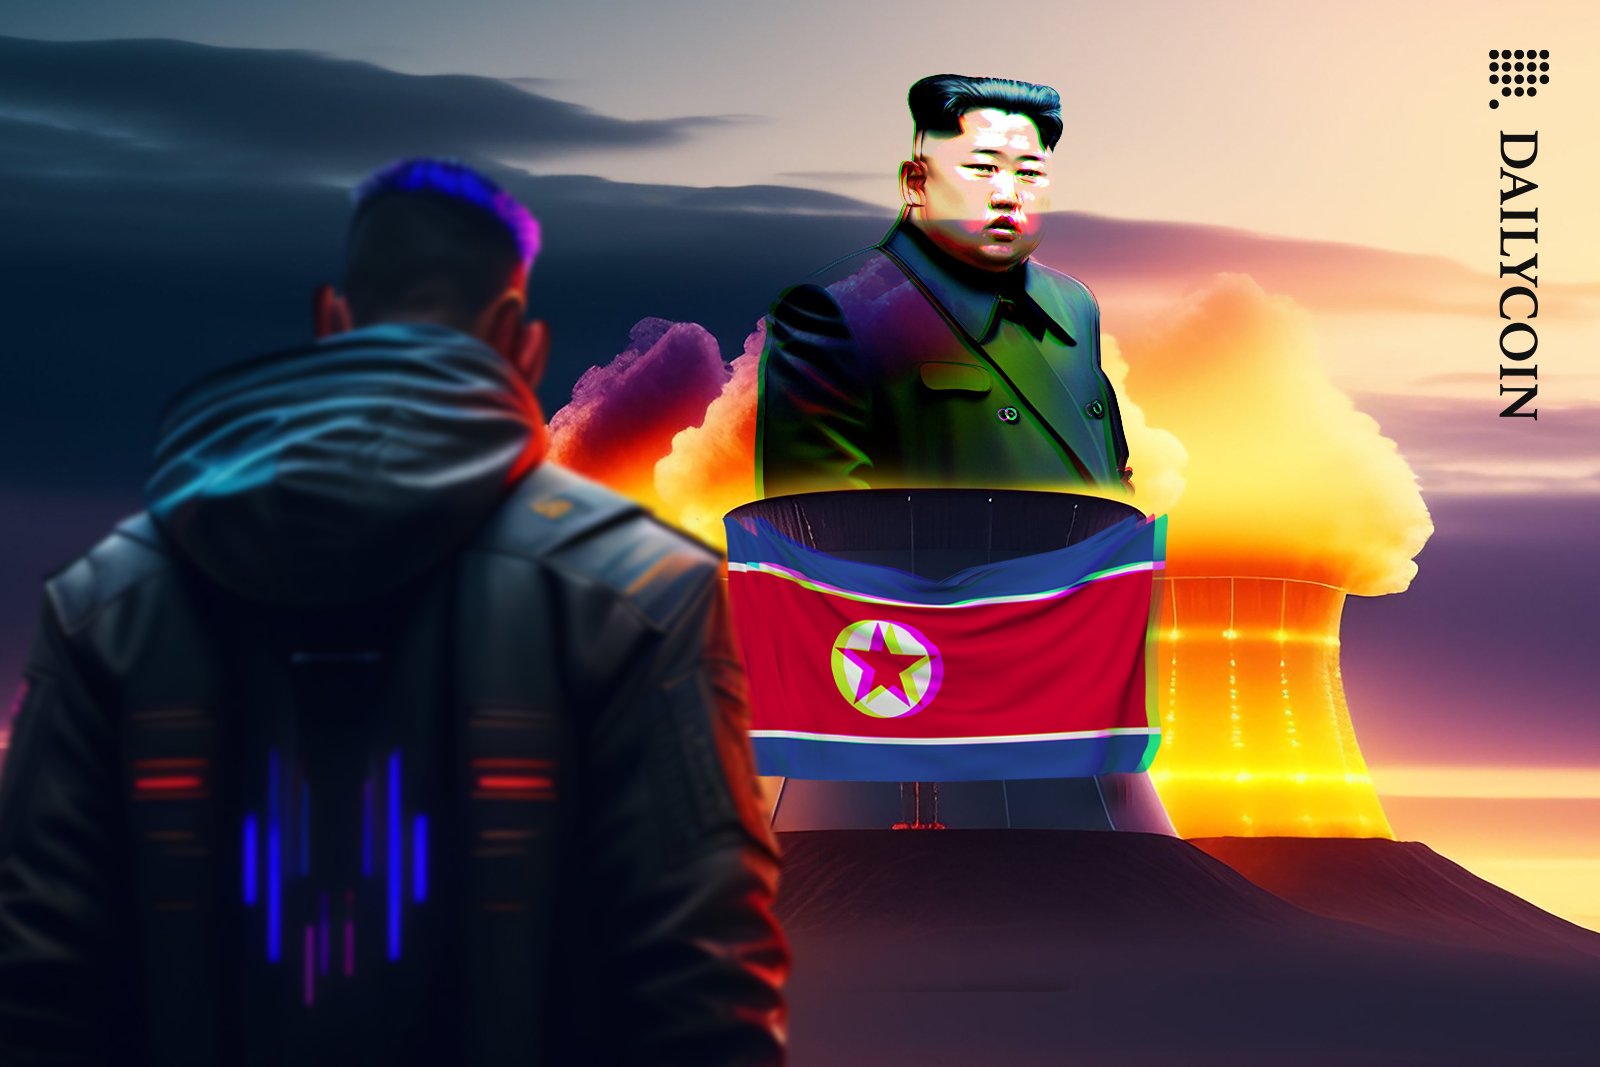 Kim Jong Un glitching out of a nuclear plant.